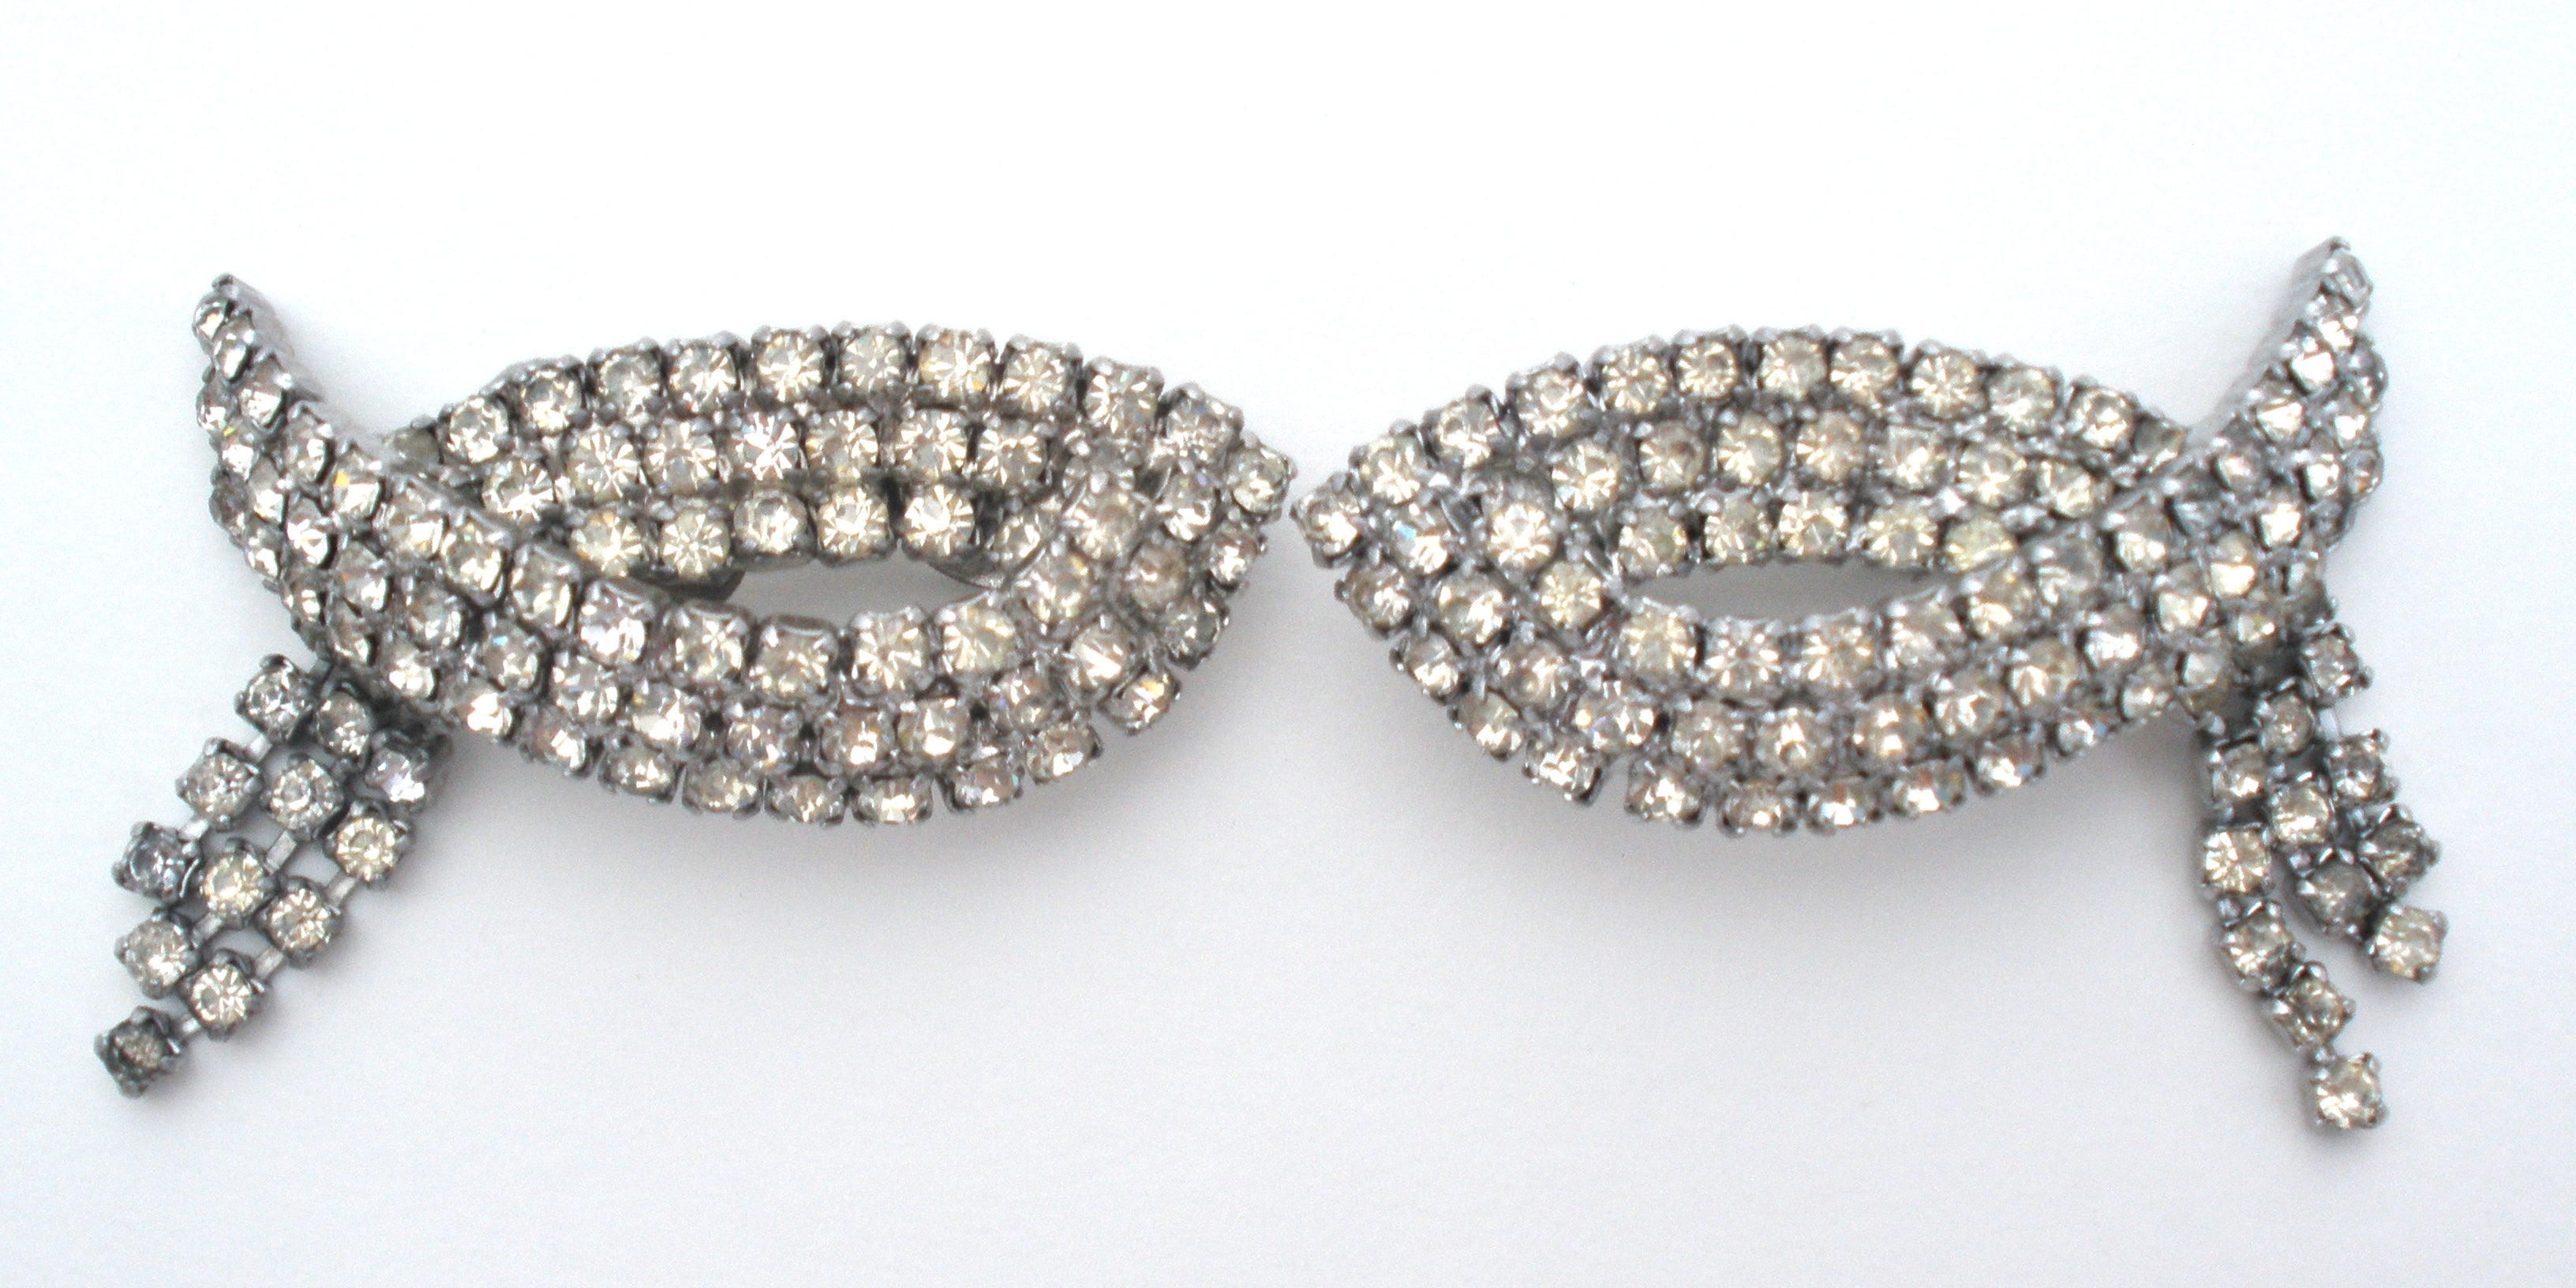 Vintage Rhinestone Shoe Clips by Musi – The Jewelry Lady's Store